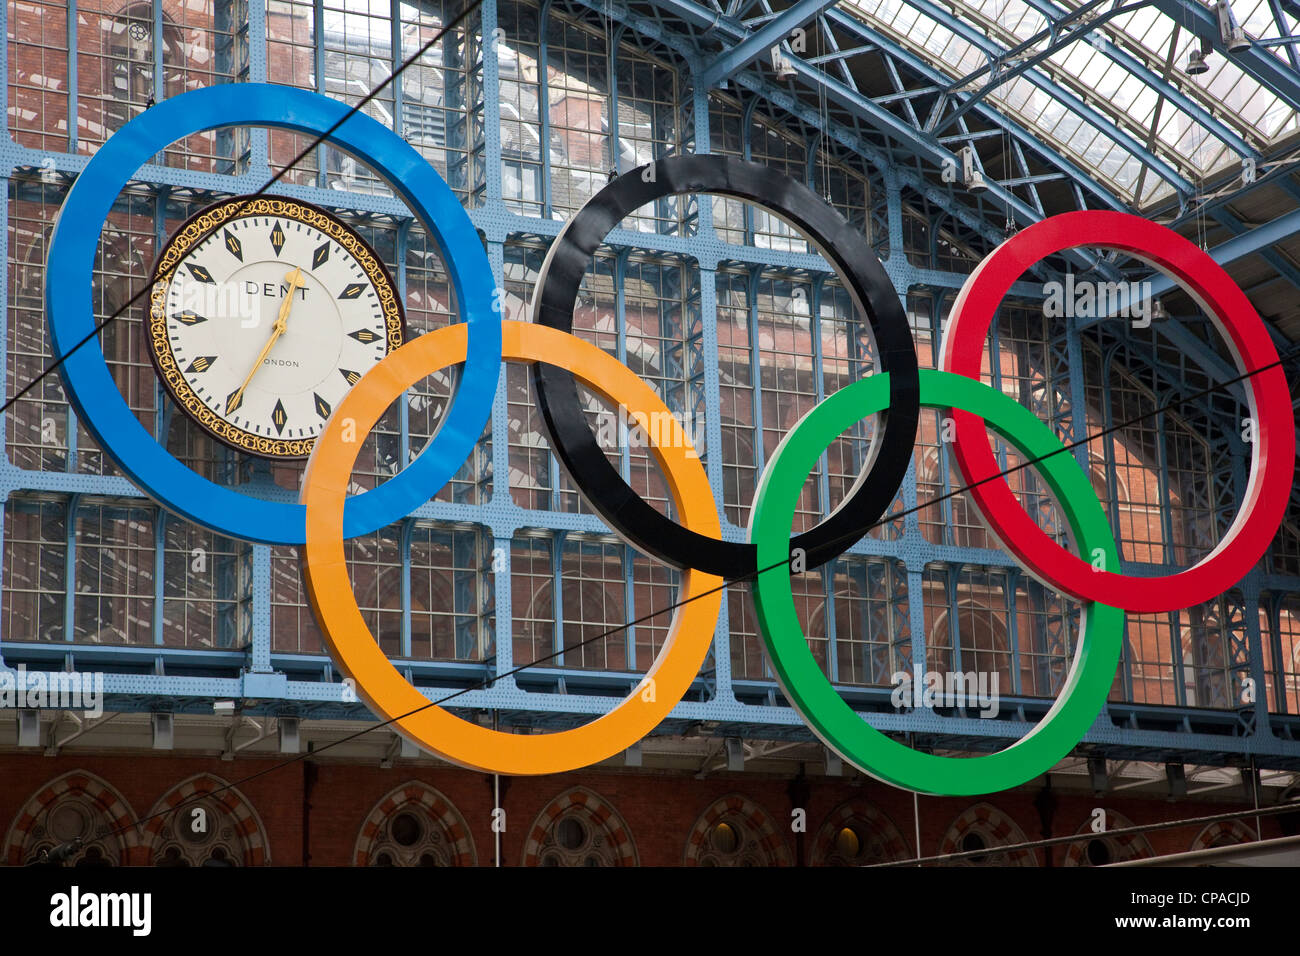 Giant set of Olympic Rings at St Pancras station, central London, United Kingdom Stock Photo